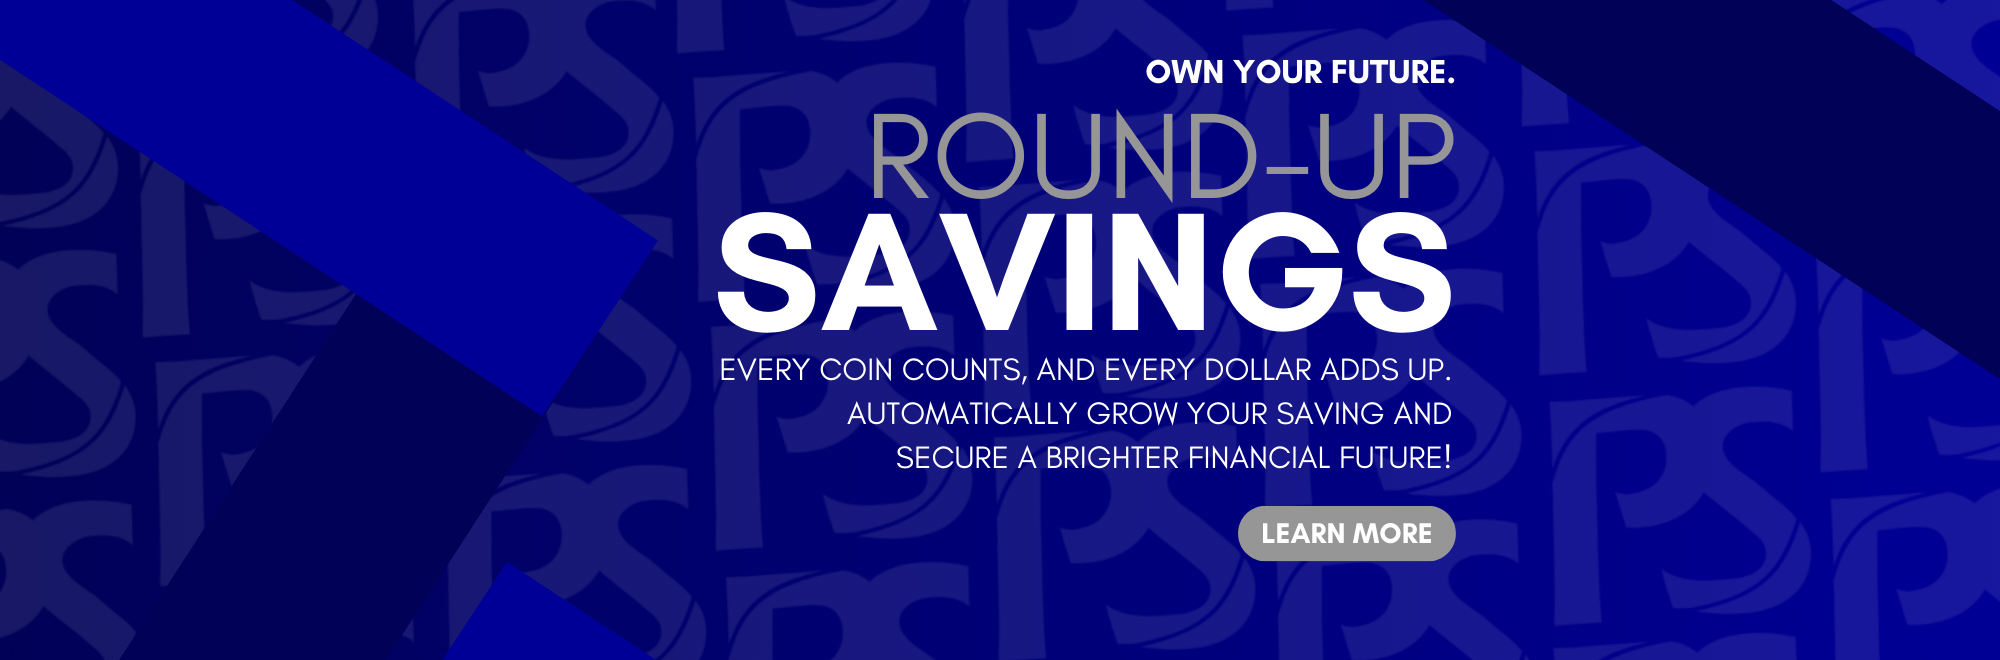 Own your future. Round Up Savings. Every coin counts, and every dollar adds up. AUTOMATICALLy gRoW YOUR saving and secure a brighter financial future! Click to learn more